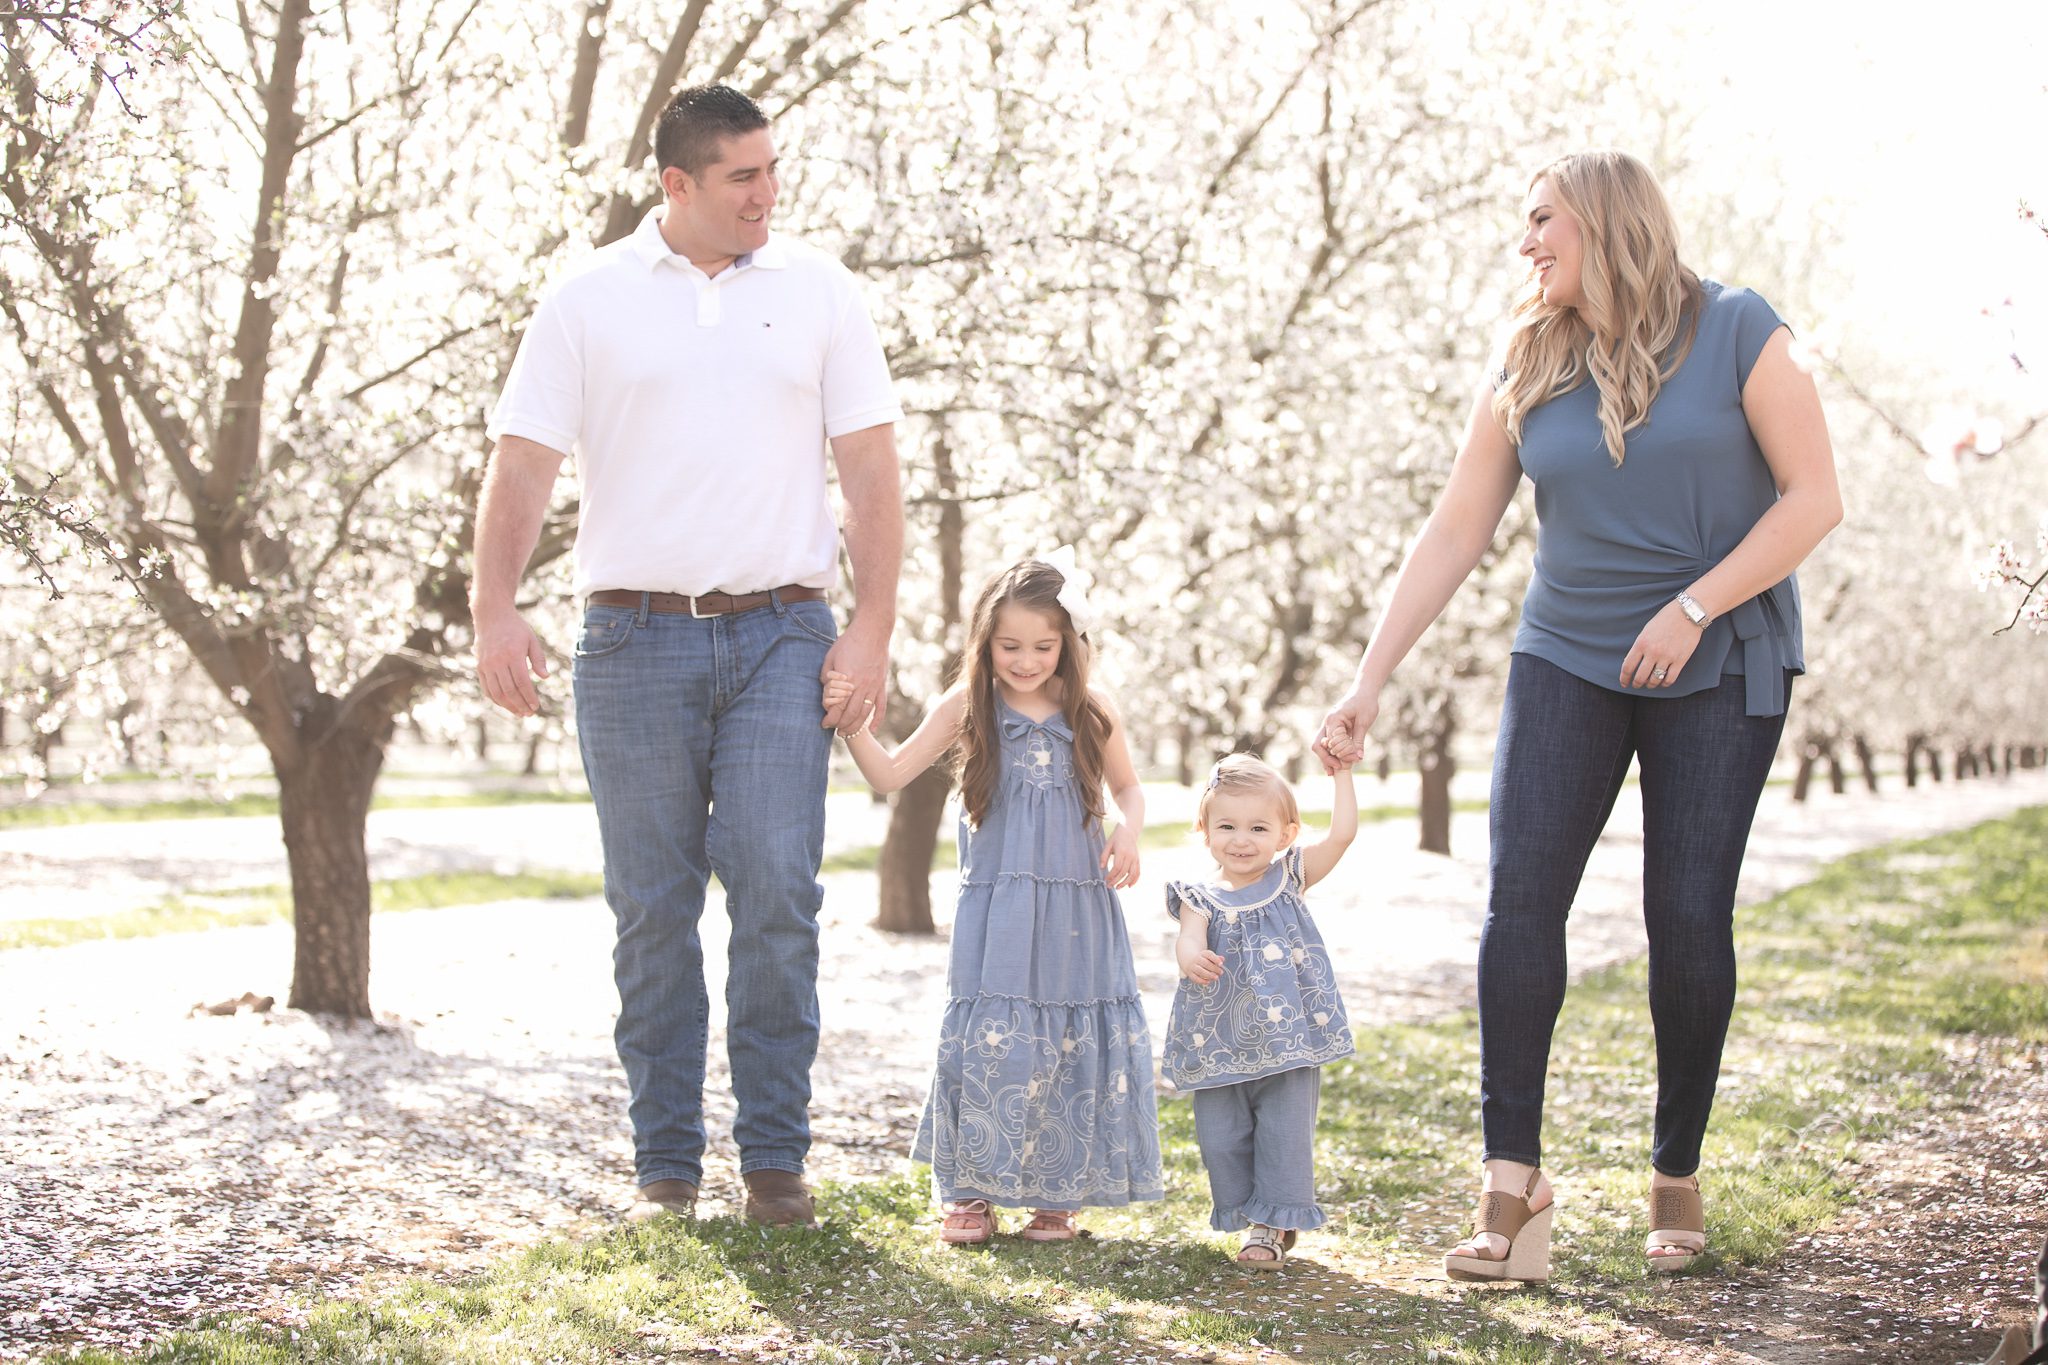 Family photos, walking in the blossoms holding hands